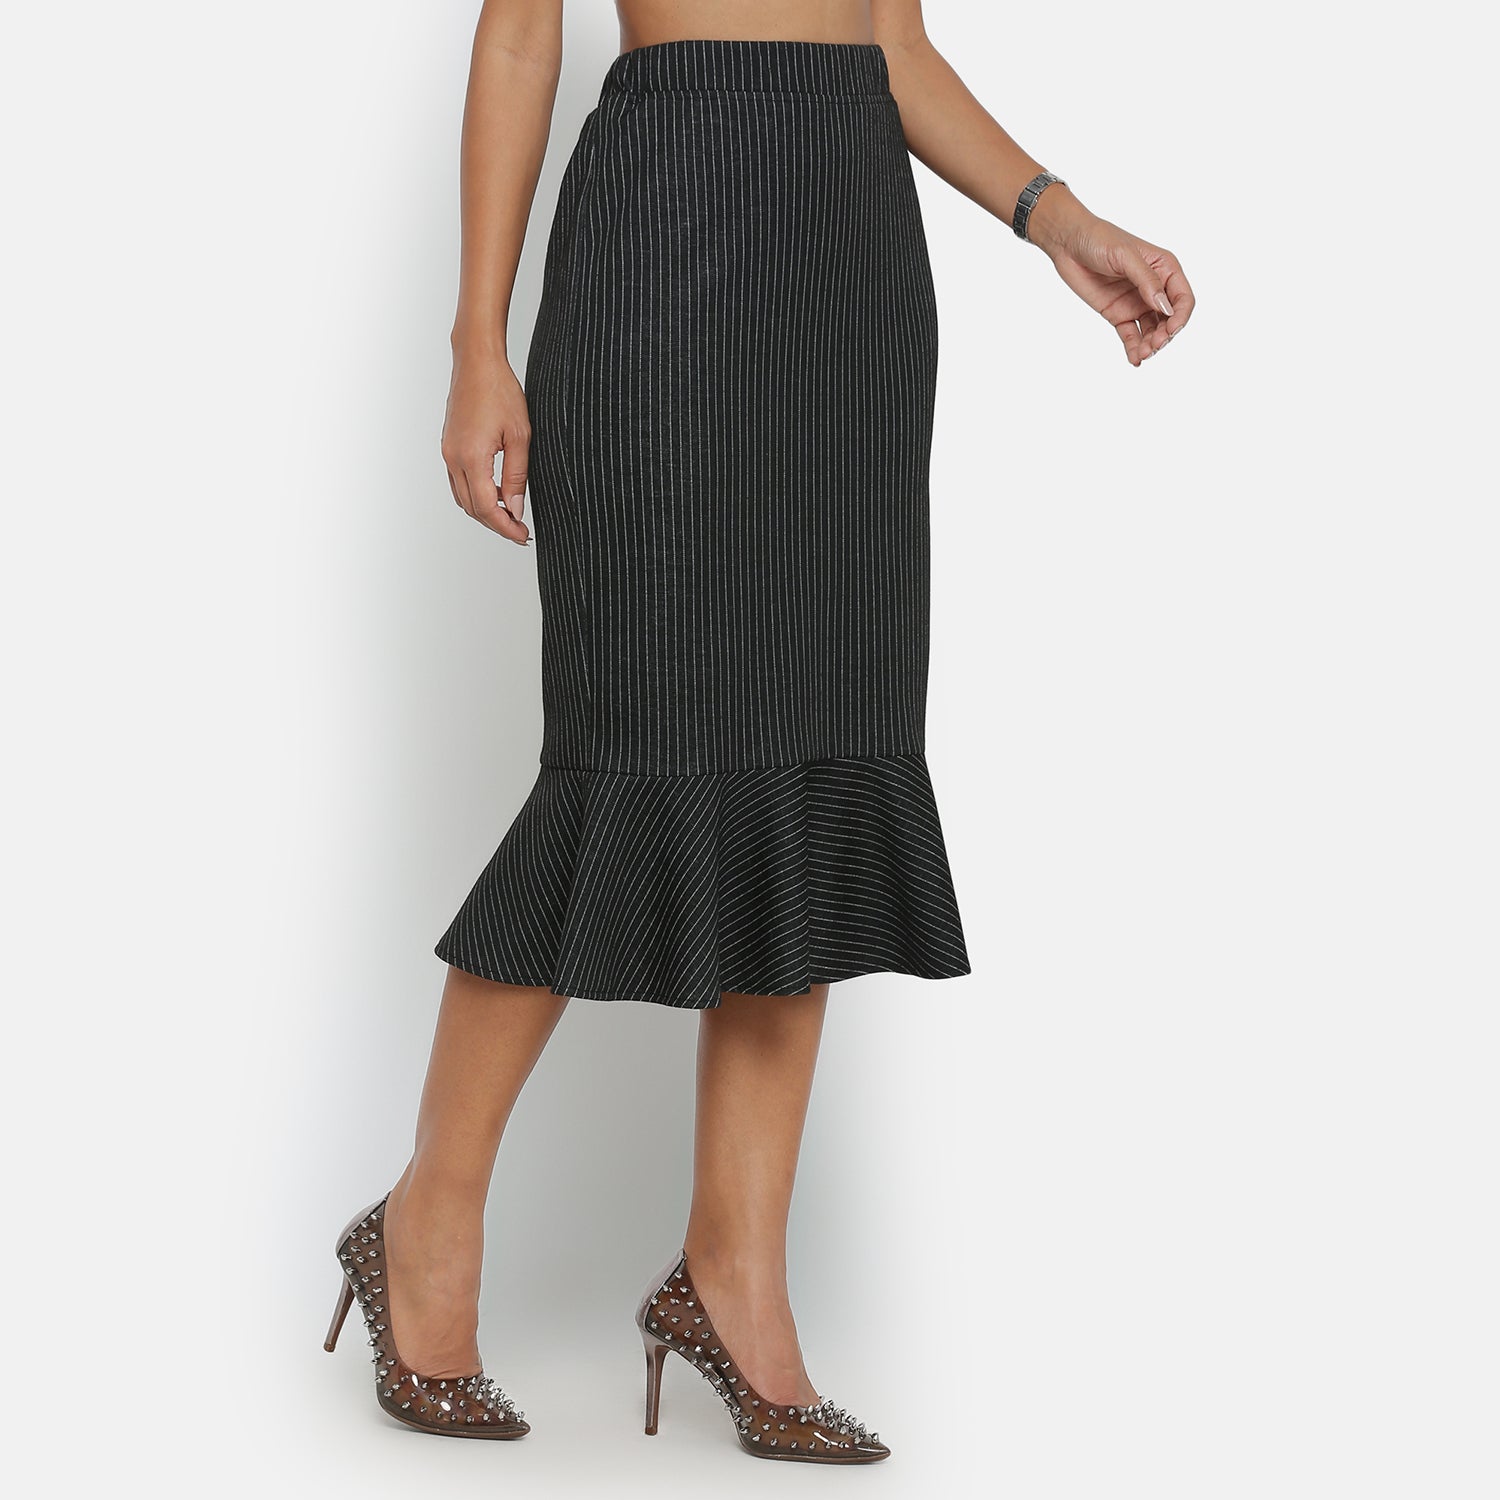 Black and White line skirt with frill